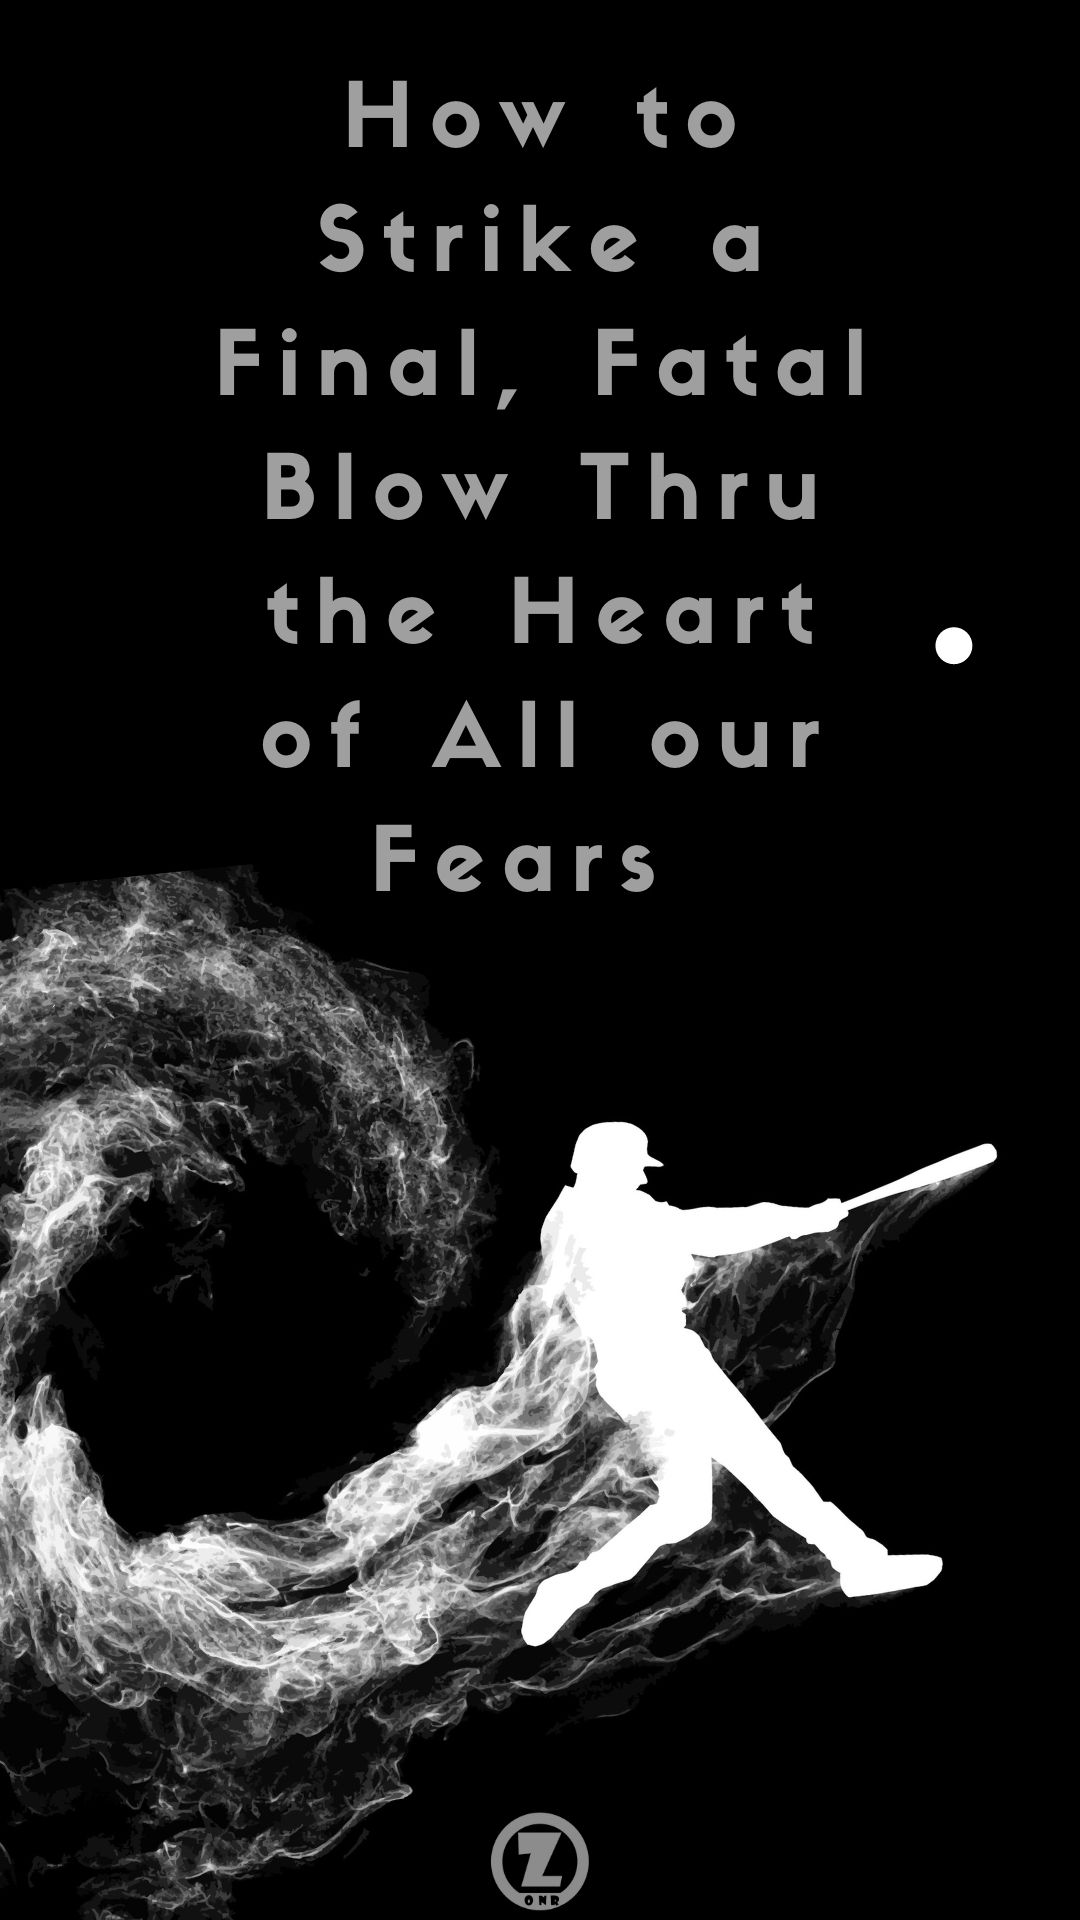 You are currently viewing How to Strike a Final, Fatal Blow Thru the Heart of All our Fears – Step 12